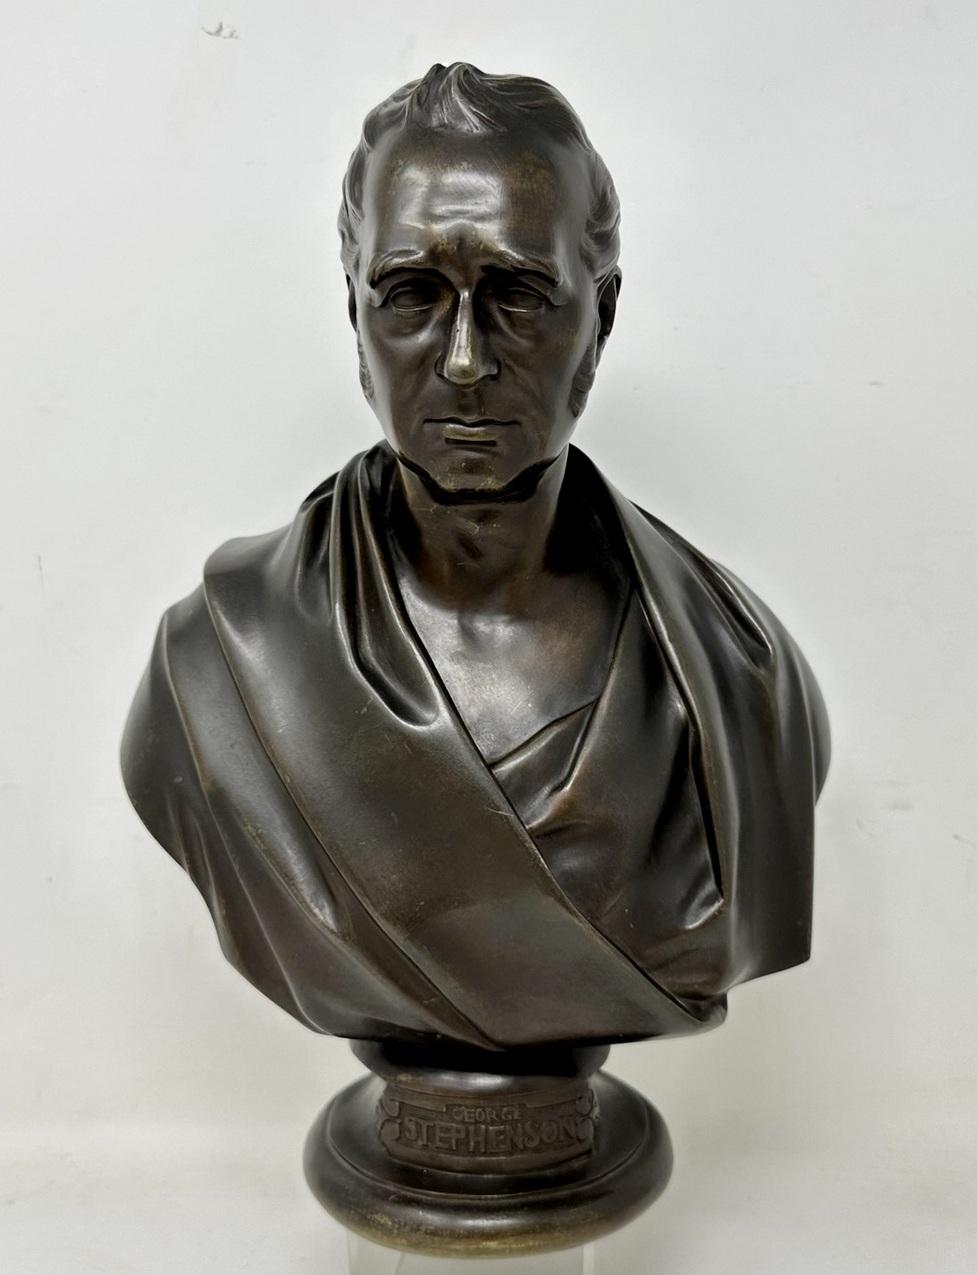 A Very Impressive & Superbly Cast Patinated Bronze Bust of George Stephenson, of generous proportions. Mid Nineteenth Century. Engraved E W Wyon Sculptor and dated 1858 also engraved DELPECH RED.  

Dressed in classical draperies and looking